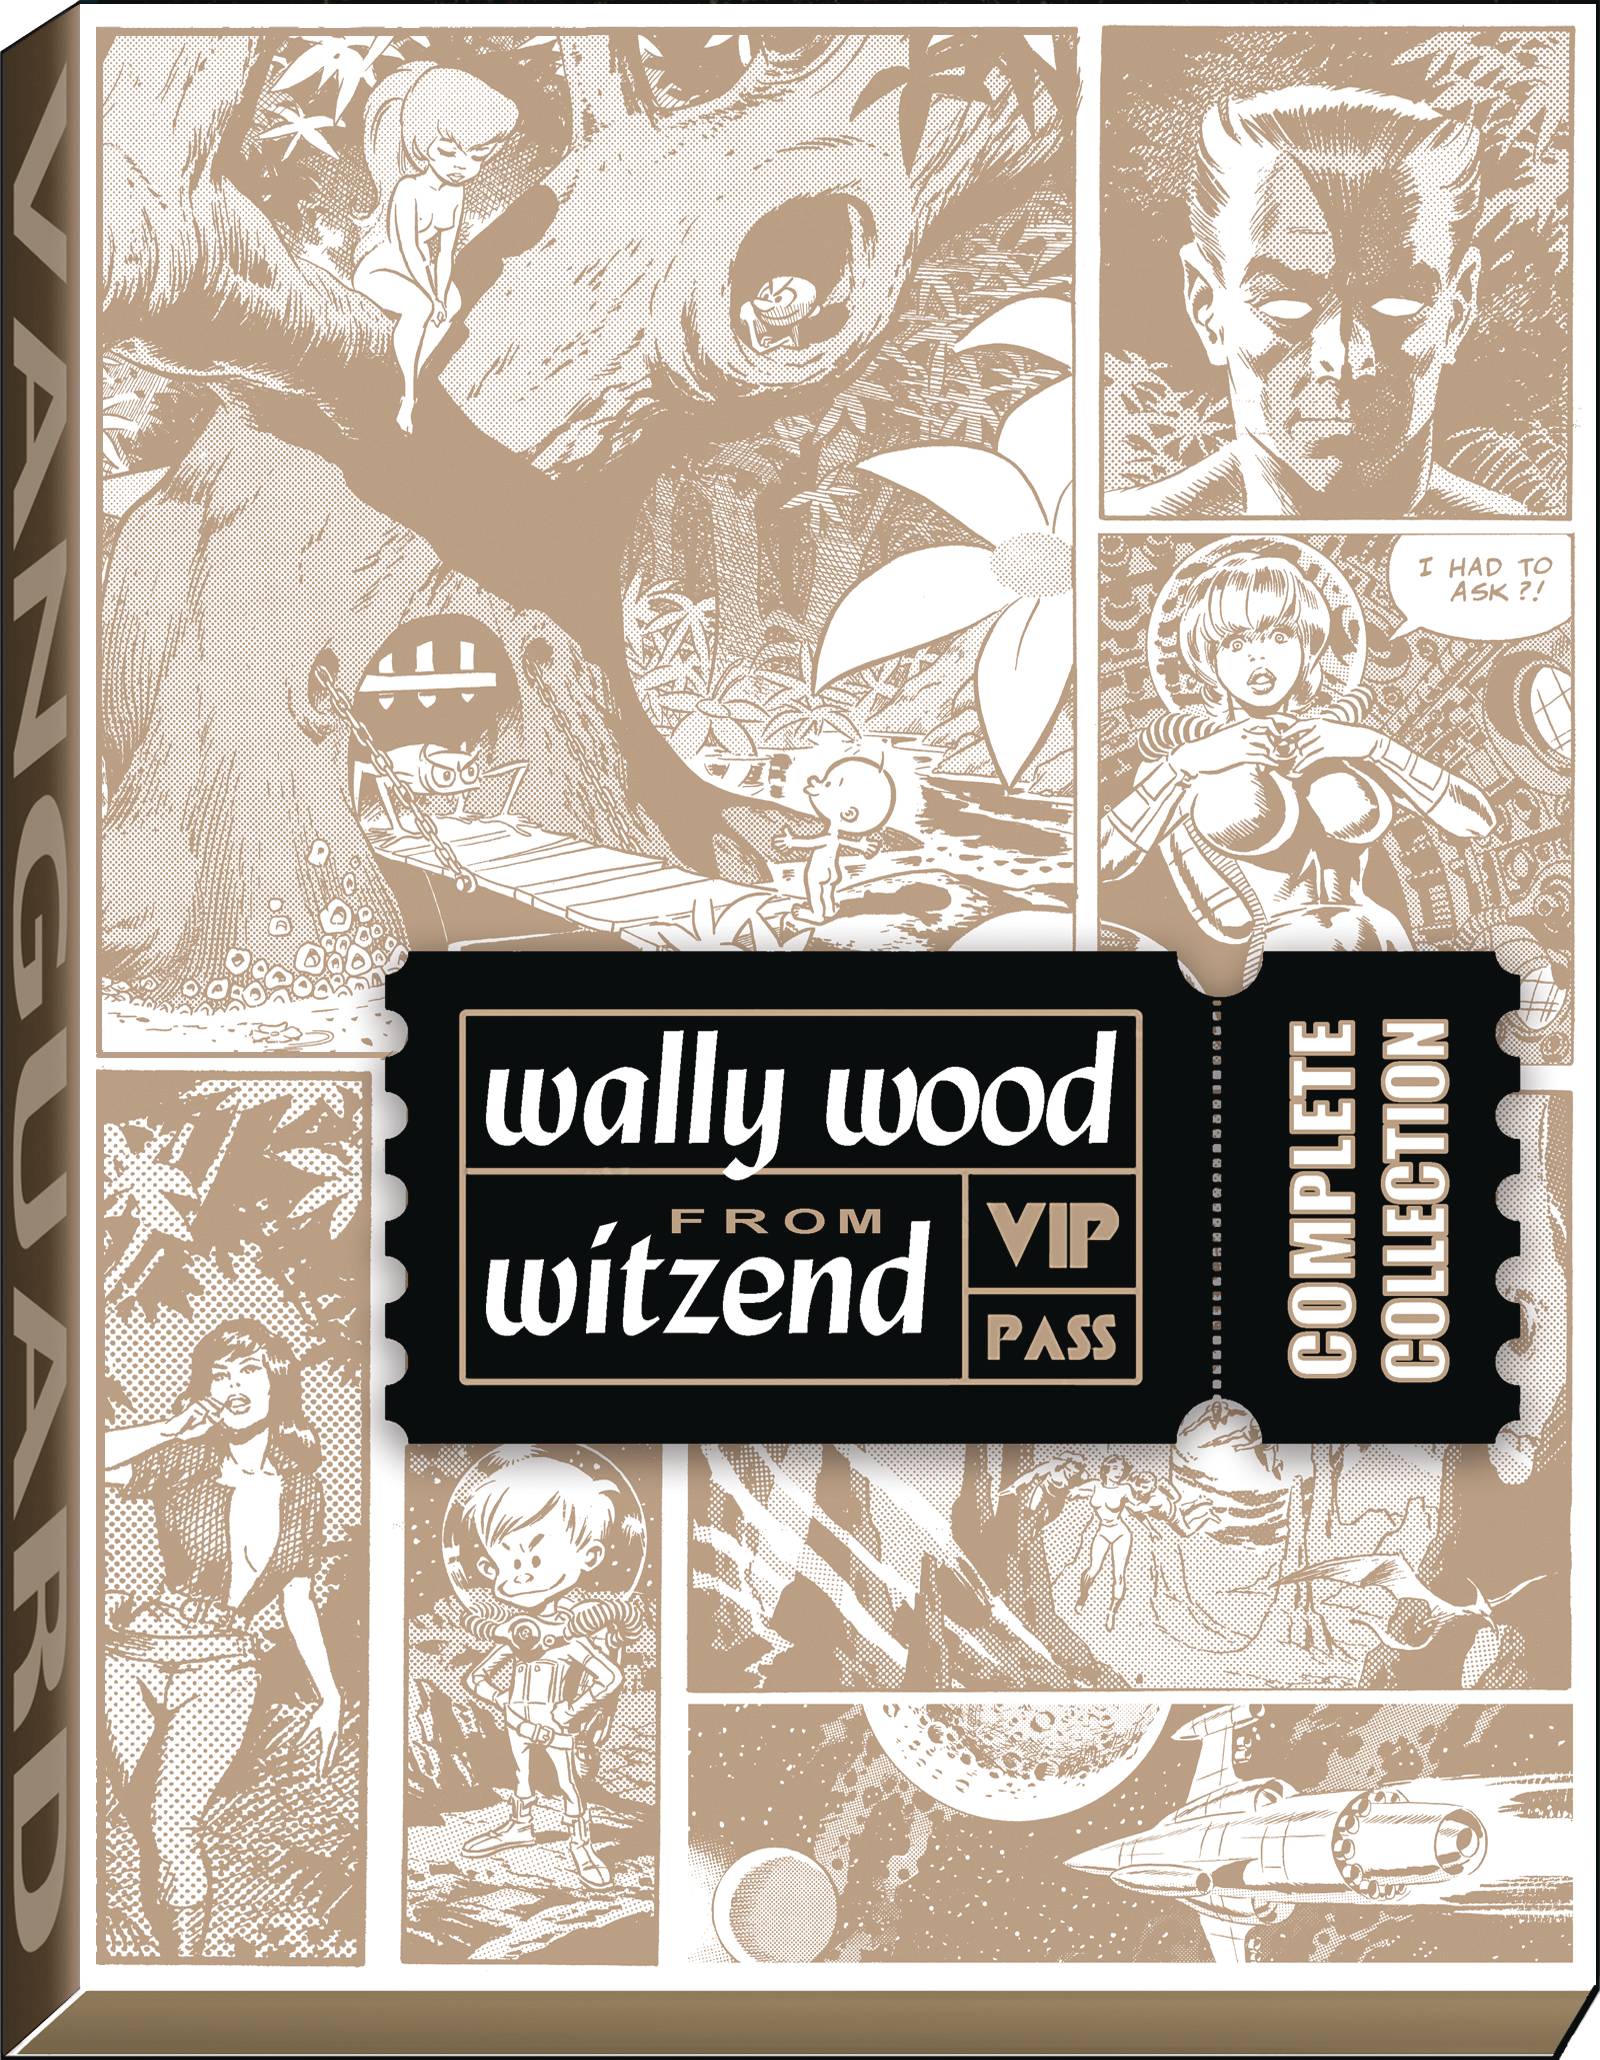 COMPLETE WALLY WOOD FROM WITZEND HC SLIPCASE ED